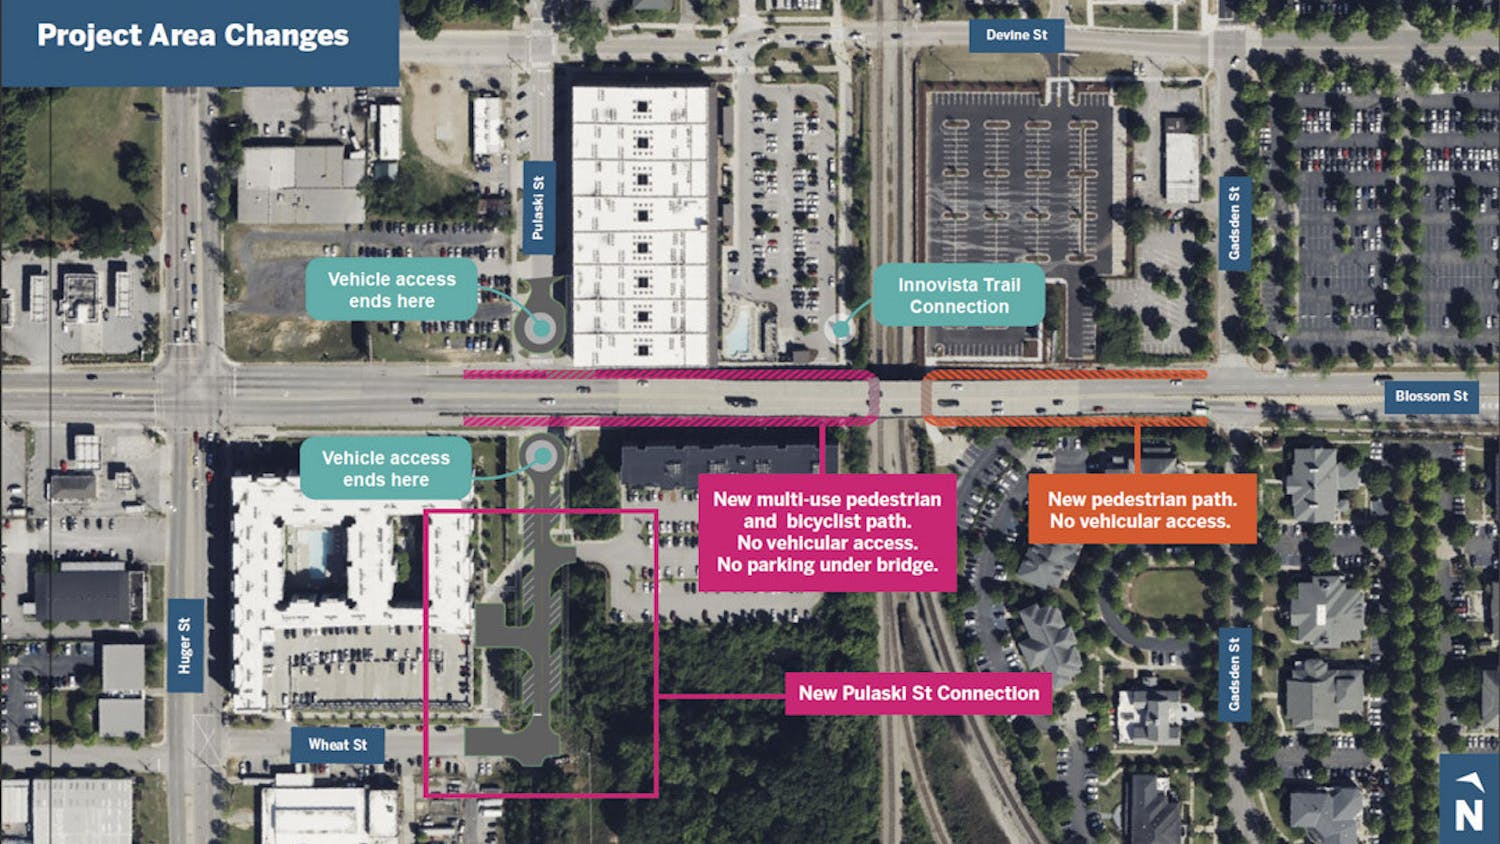 A map showing the construction plans for the Blossom Street Bridge Project. Construction on the bridge is planned to take place as early as summer 2024, which will add pedestrian and bike passages under the bridge, and sidewalks will be added to the top of bridge for pedestrian access as well.